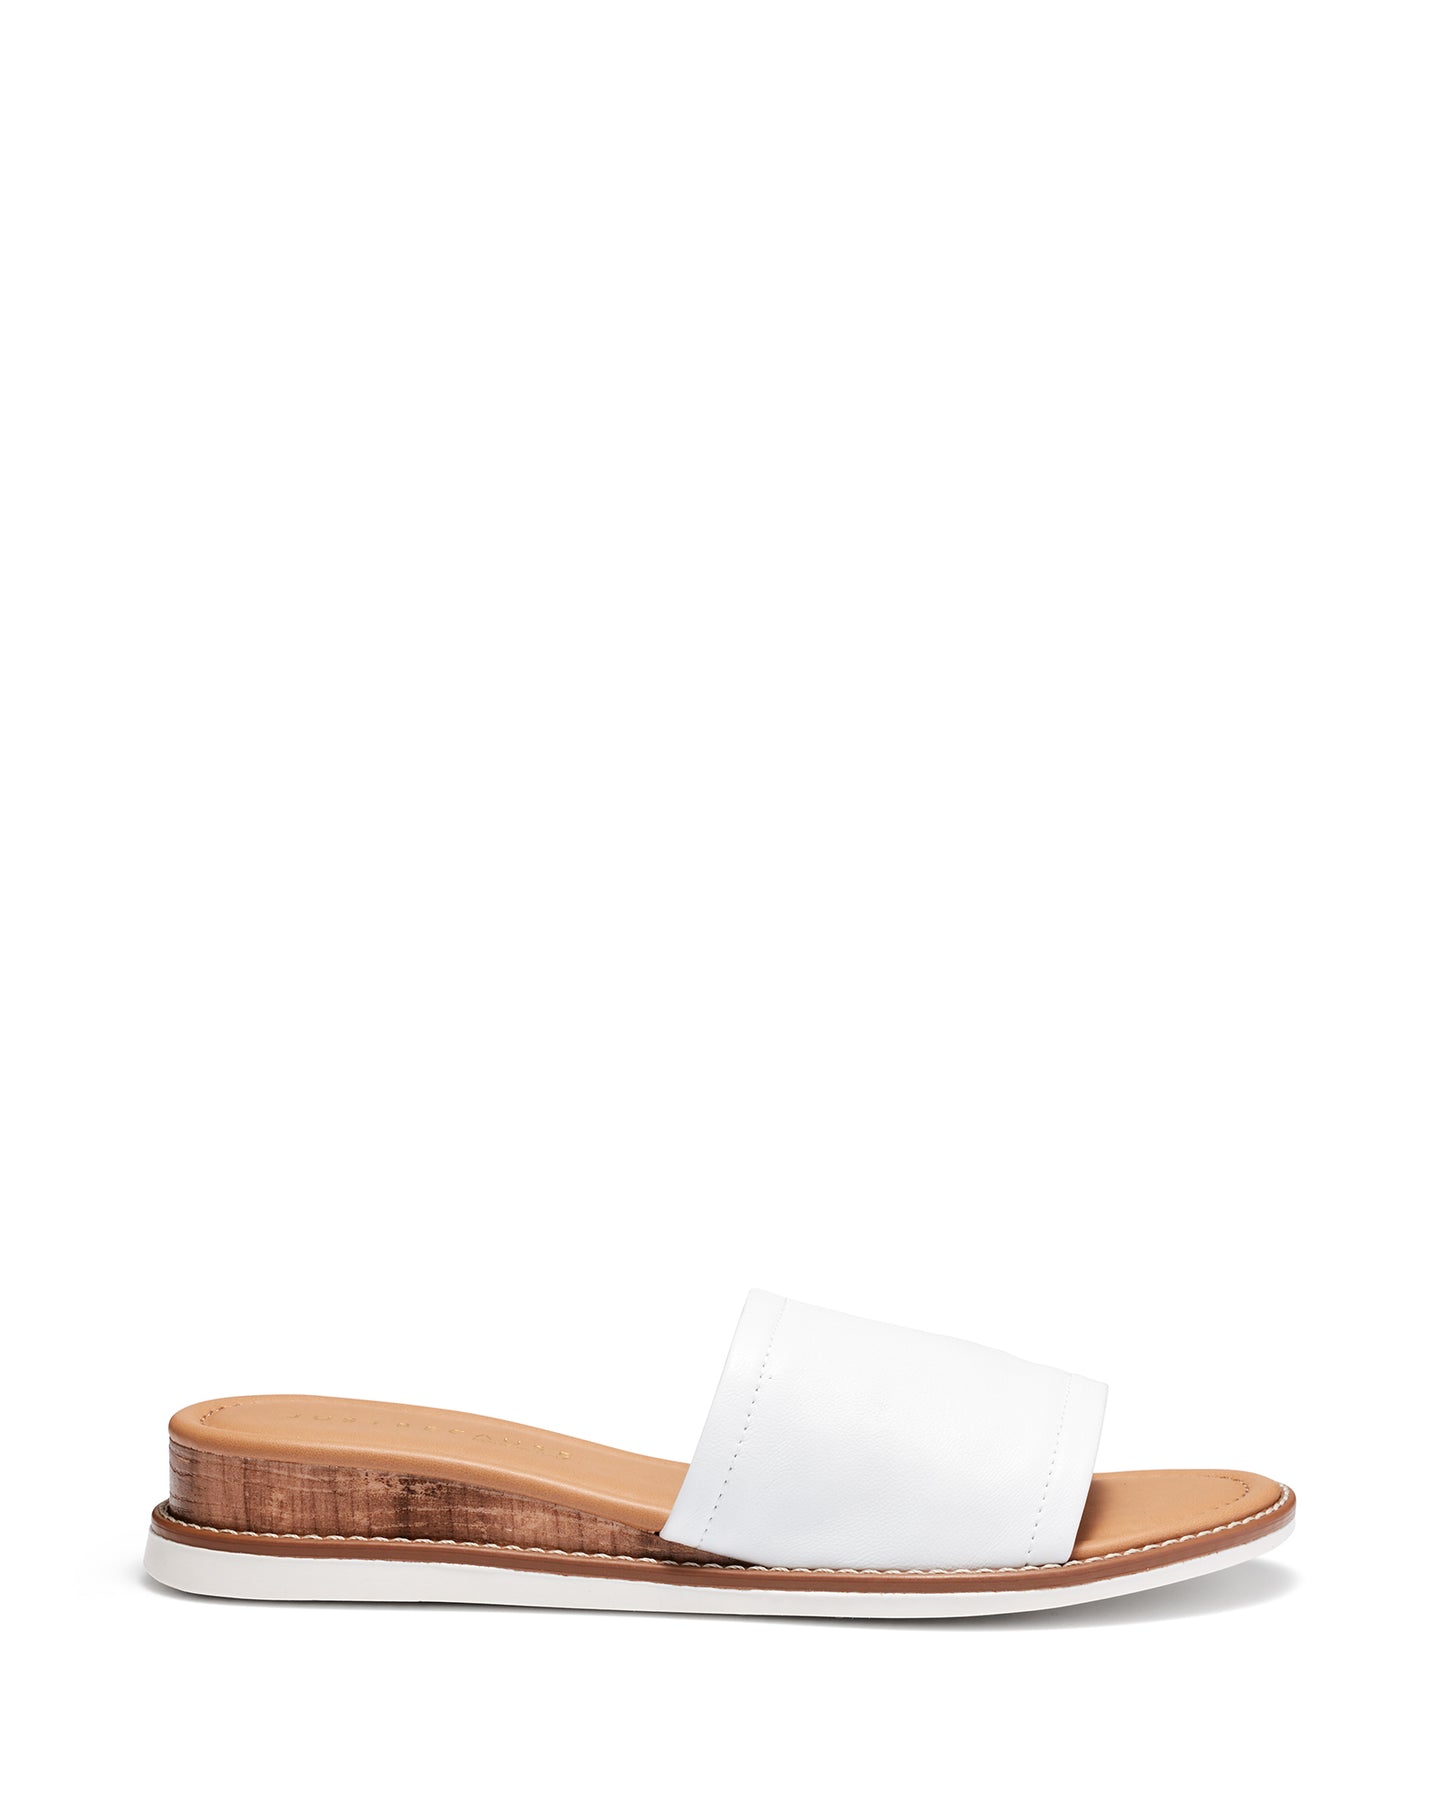 Just Because Shoes Flora White | Leather Sandals | Slides | Wedges